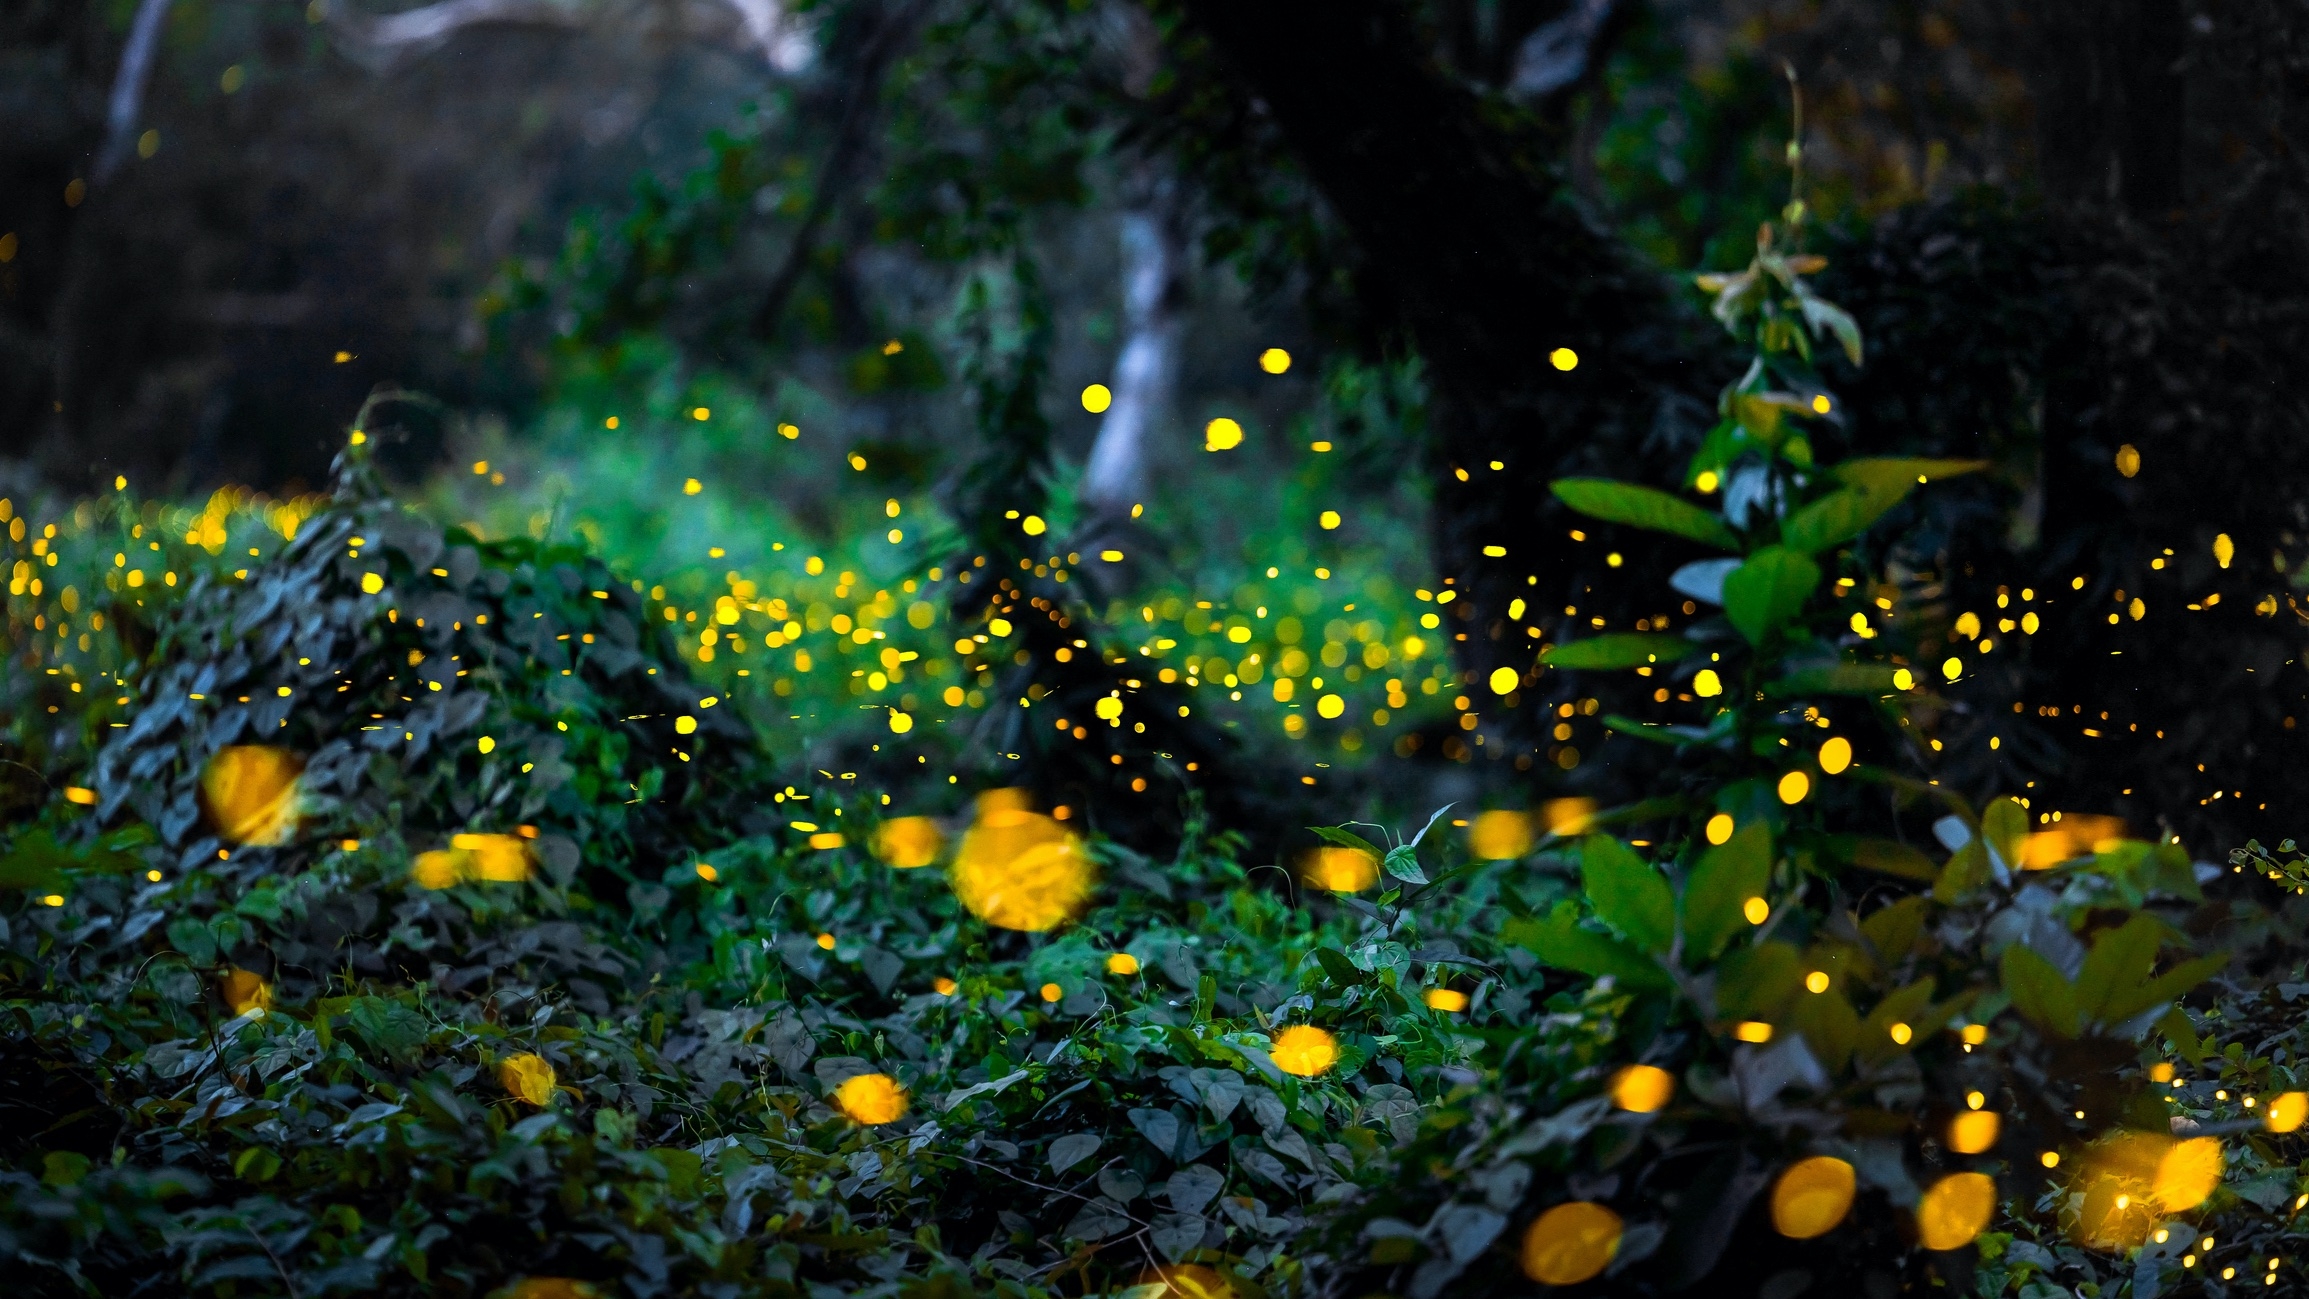 lfireflies looking like yellow circles in the early evening